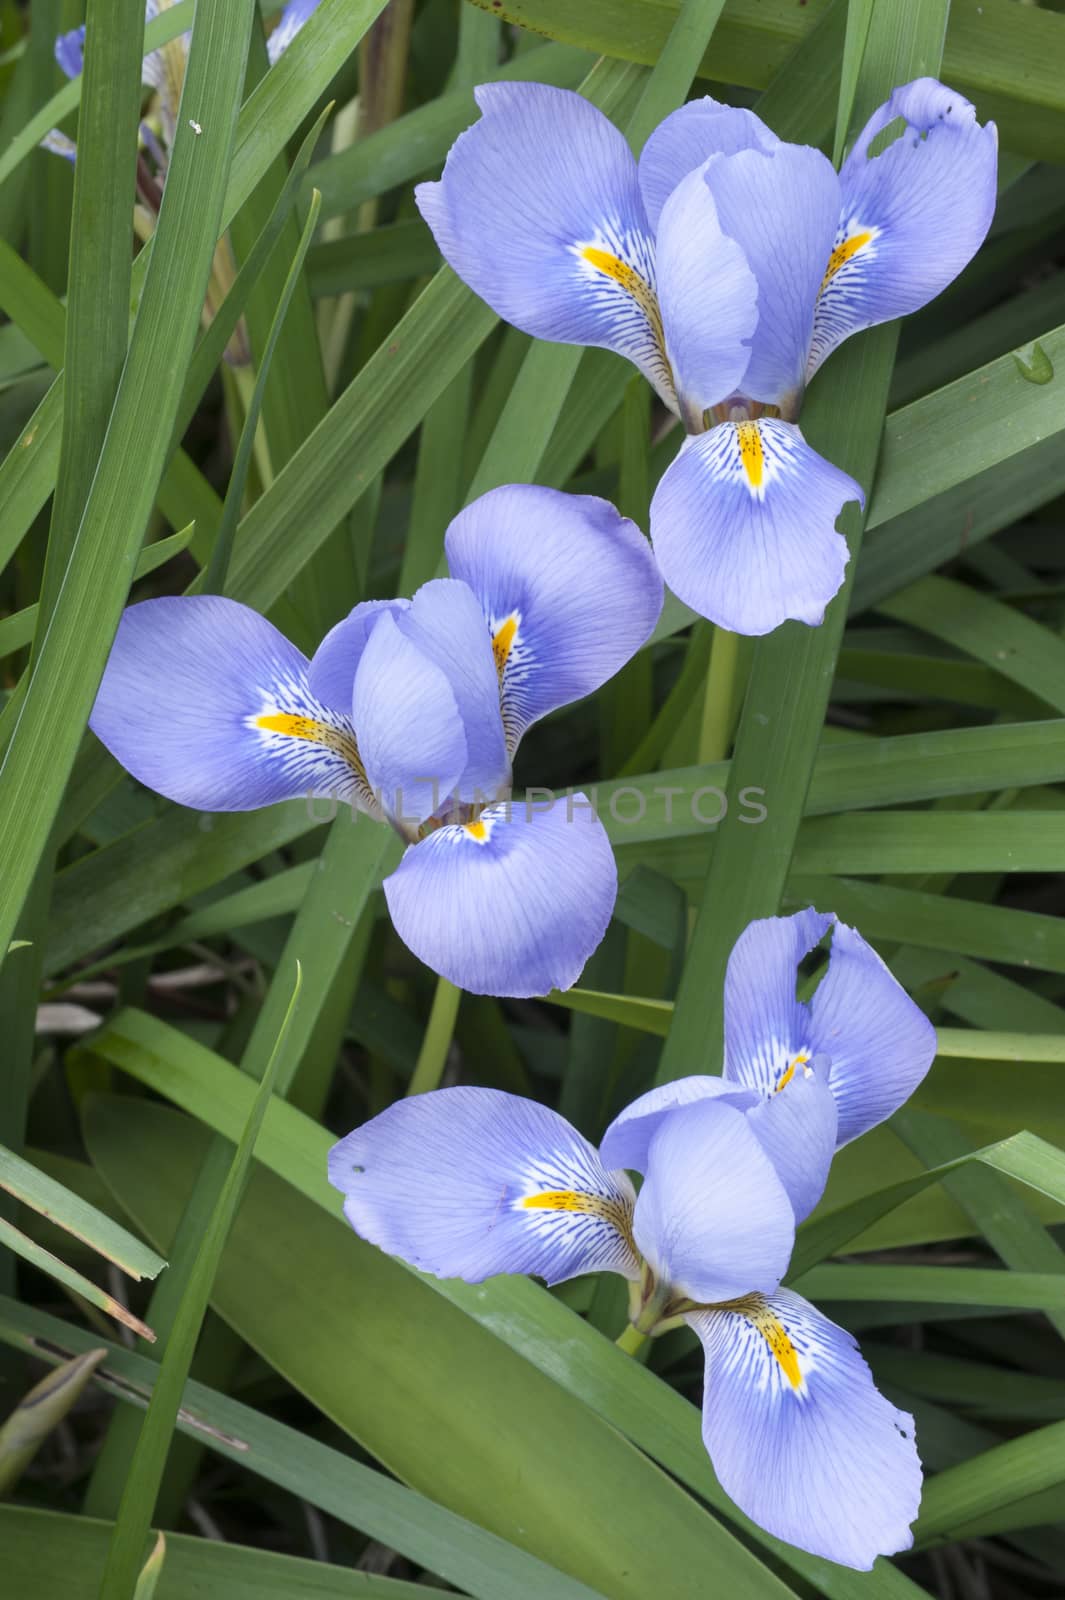 Blue and yellow iris flowers  by AlessandroZocc